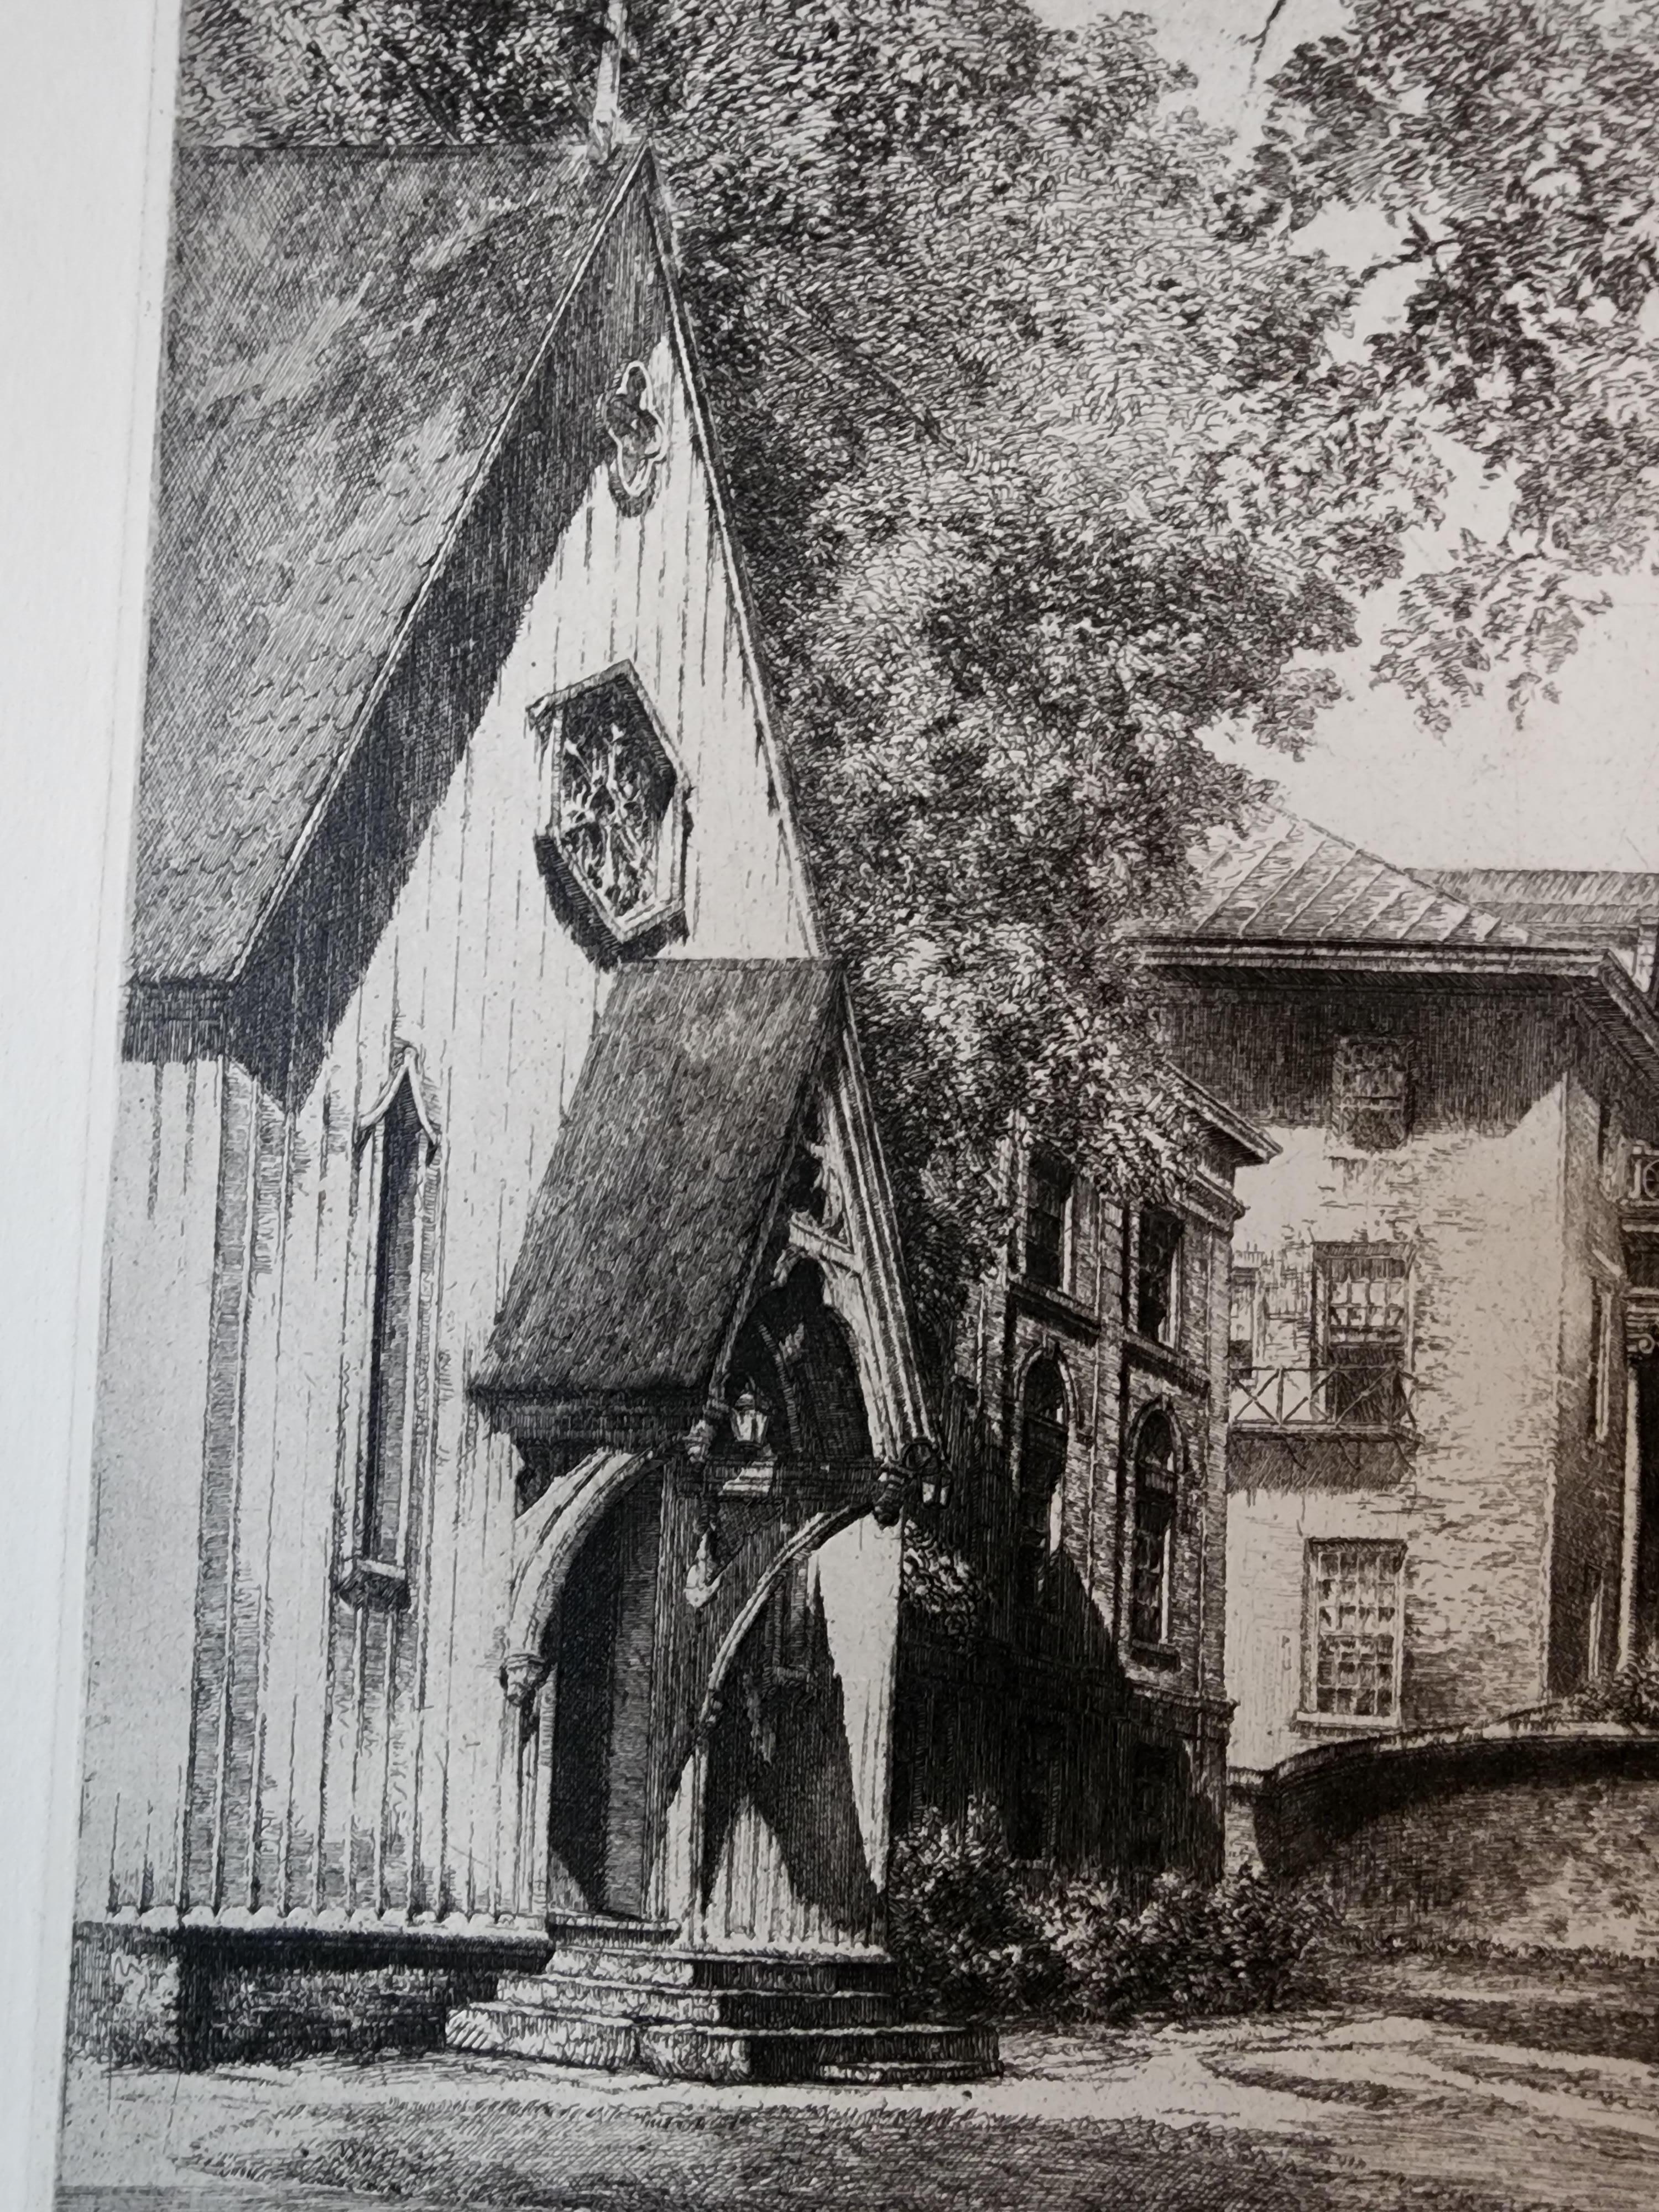 St. Mary's Episcopal School for Girls, Raleigh, North Carolina  - American Realist Print by Louis Orr